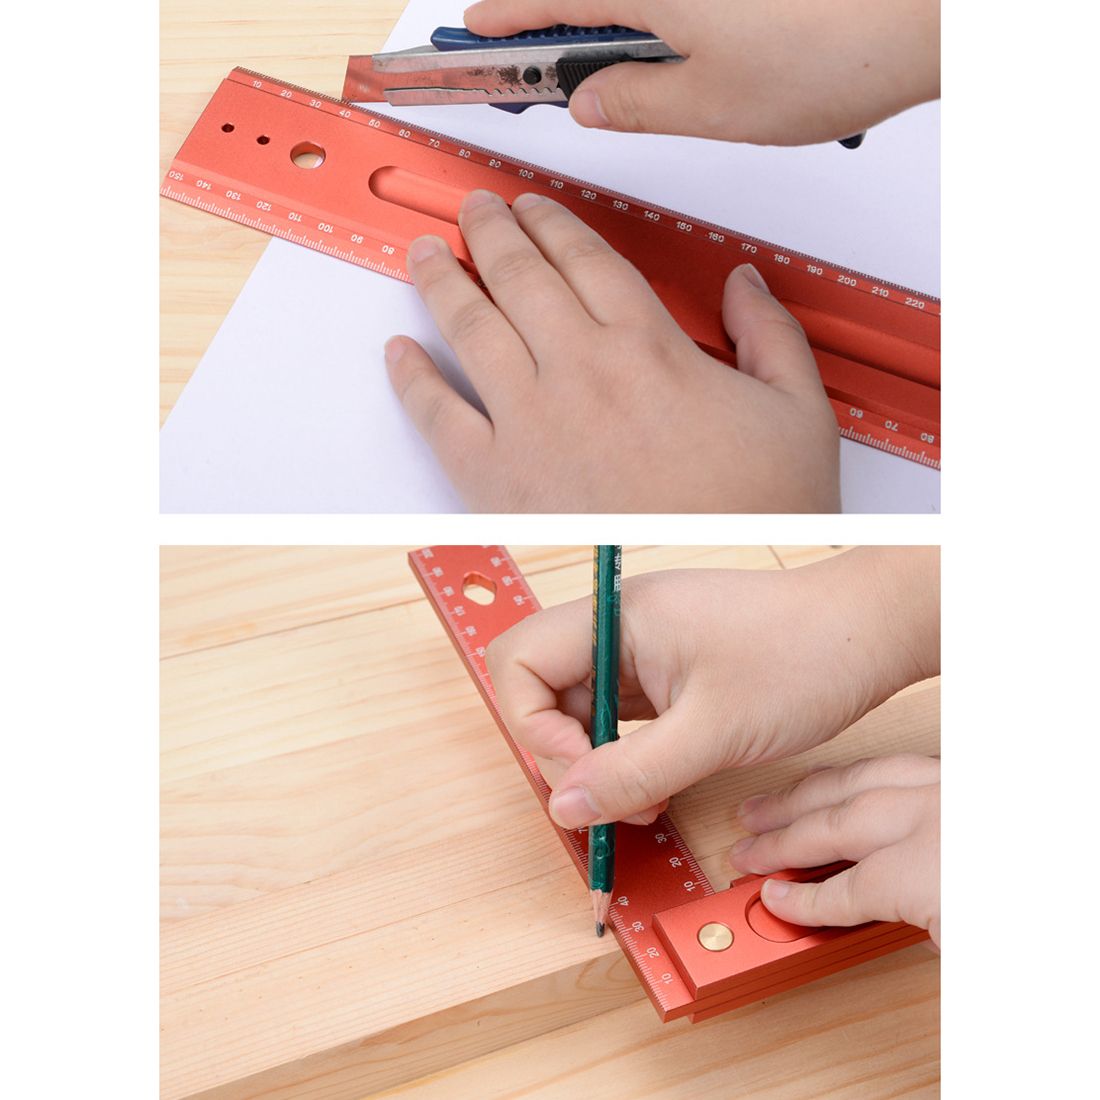 300mm-Carpenters-Right-Angle-Measuring--Ruler-Precision-Double-Sided-Leather-Craft-Cutting-Auxiliary-1665888